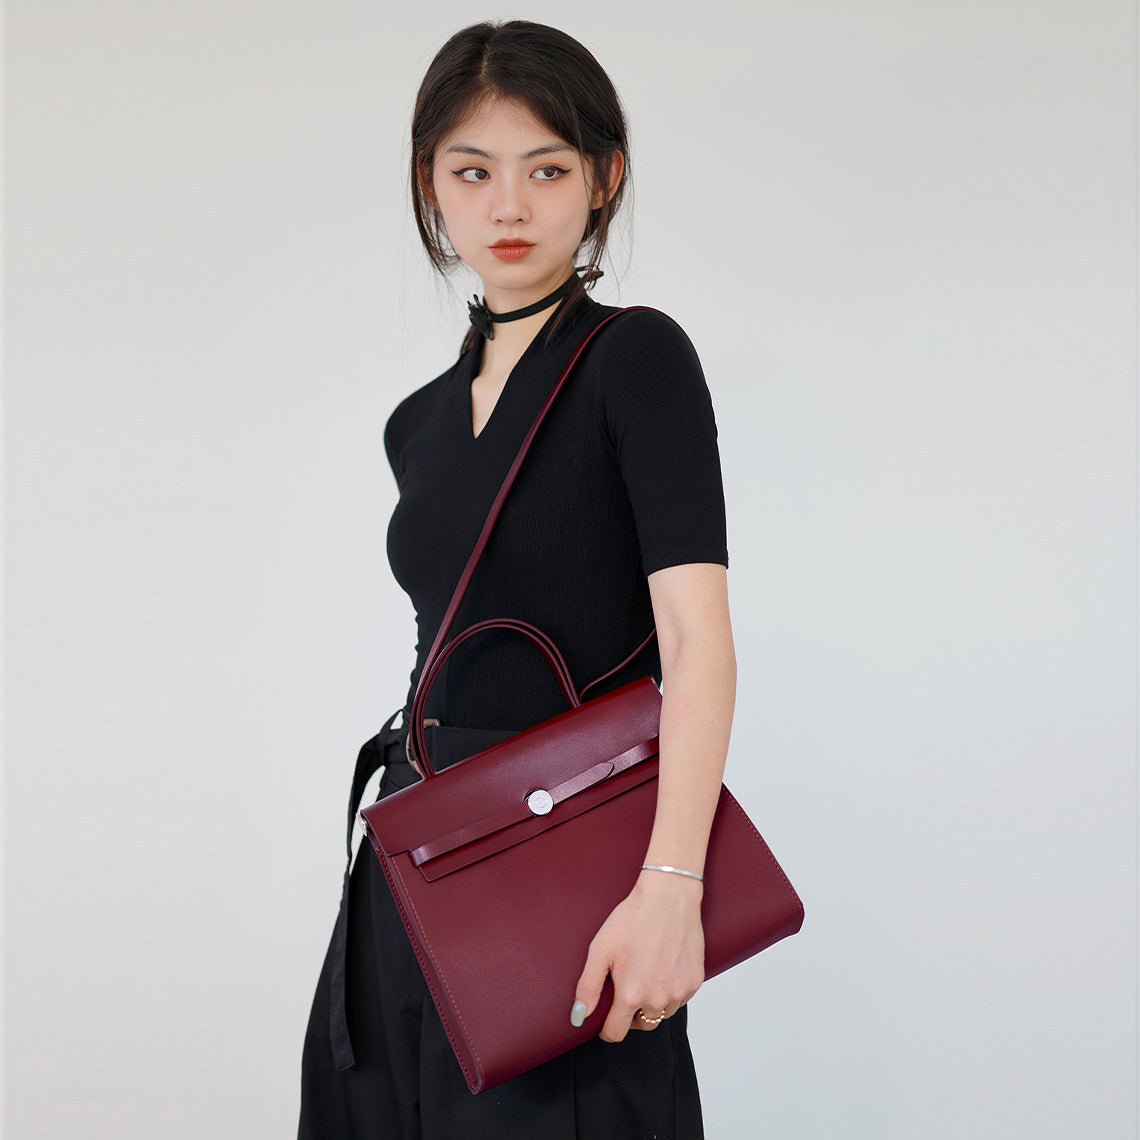 Leather Inspired Her Bag Zip Bag DIY Kit - Extra 20% Price Drop at Checkout